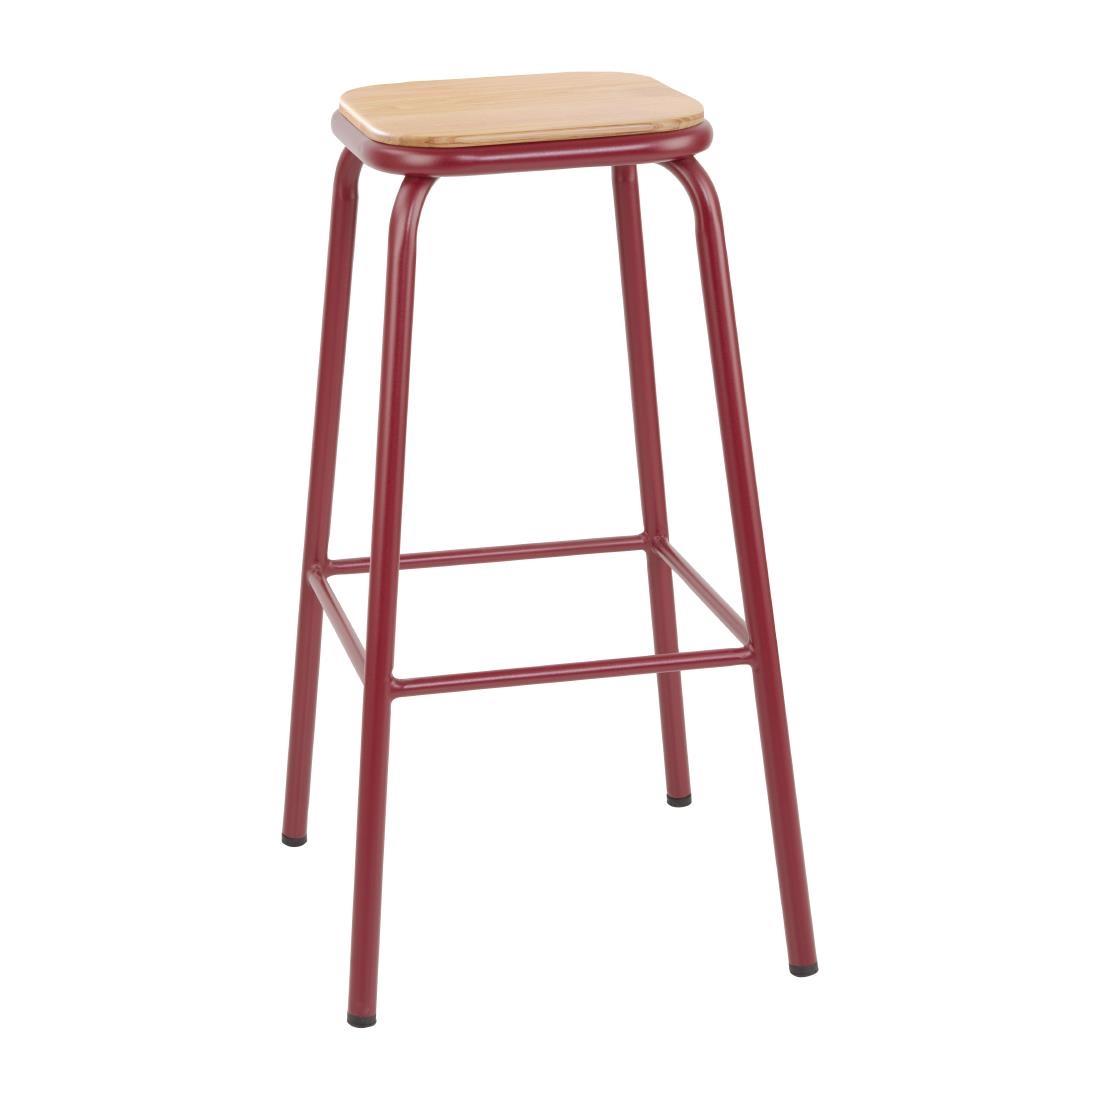 Bolero Cantina High Stools with Wooden Seat Pad Wine Red (Pack of 4) - FB937  - 1